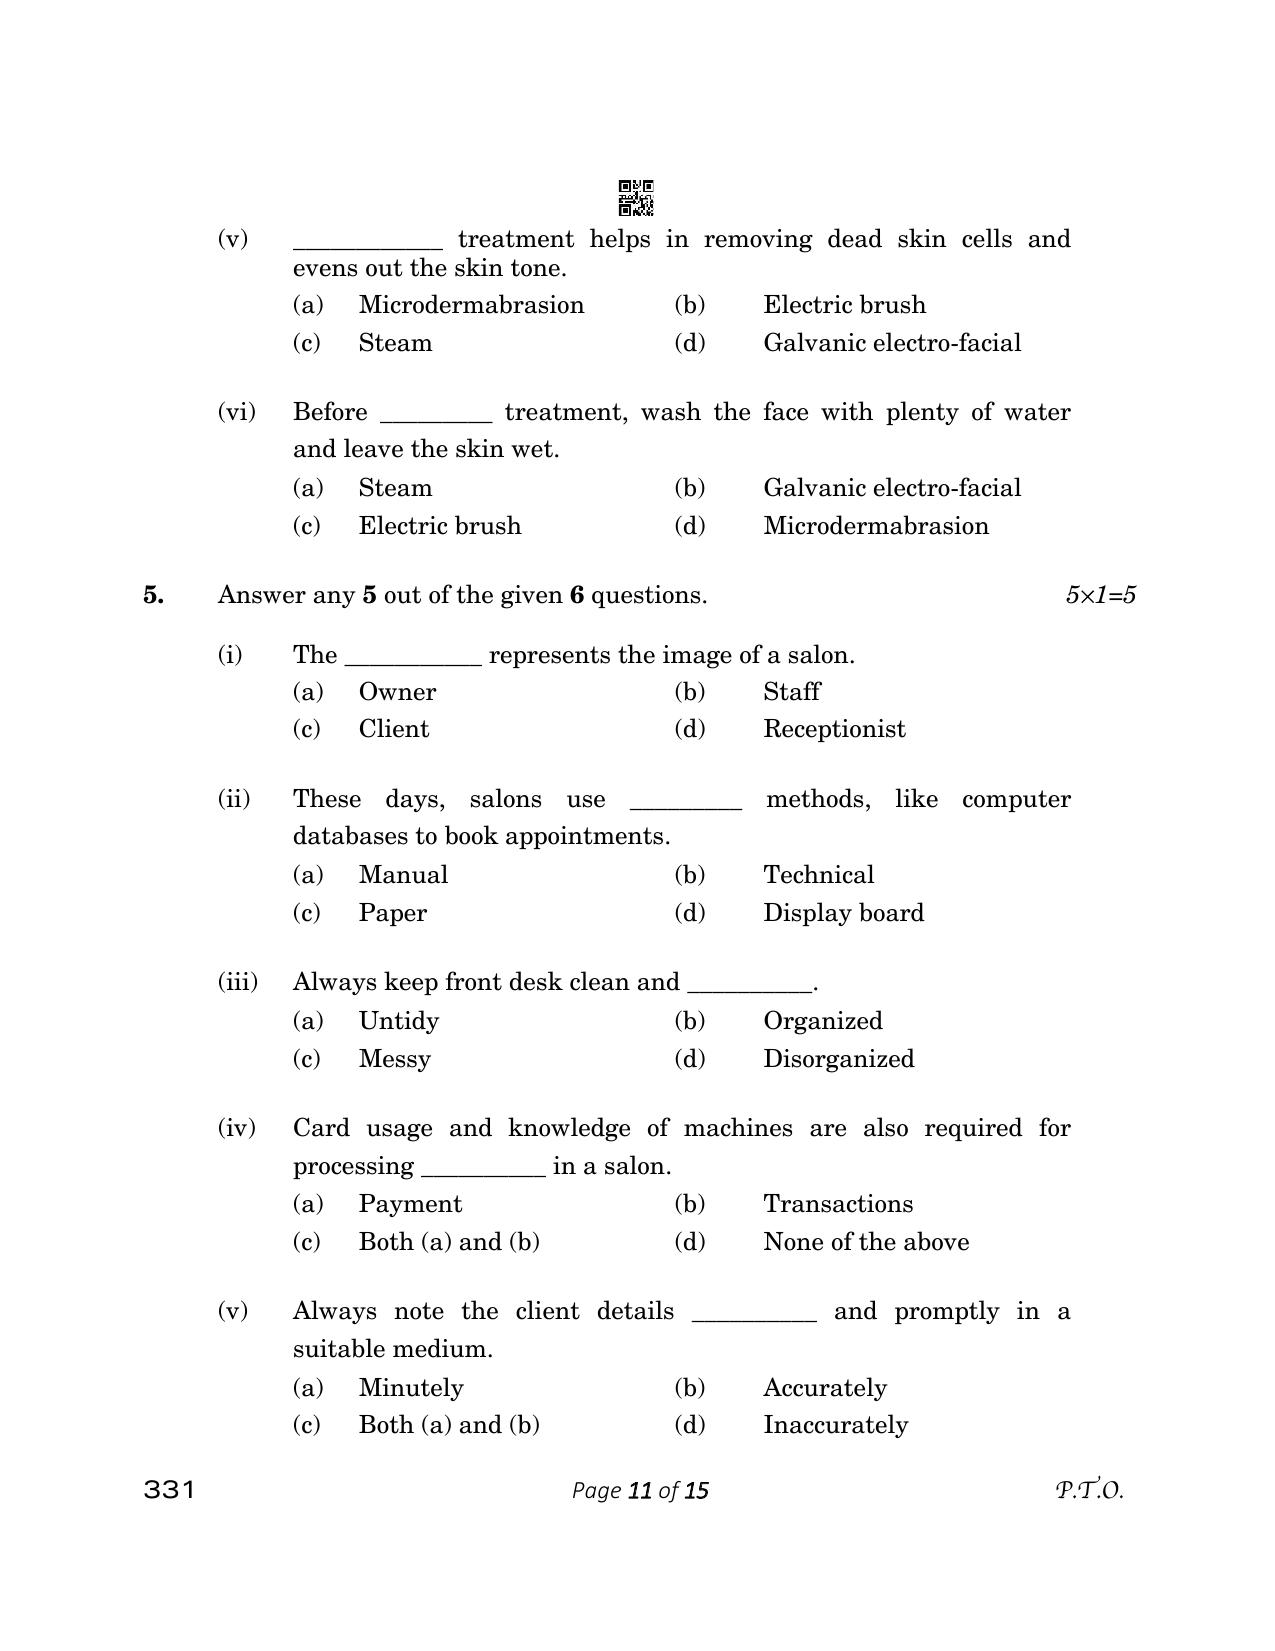 CBSE Class 12 331 Beauty And Wellness 2023 Question Paper - Page 11